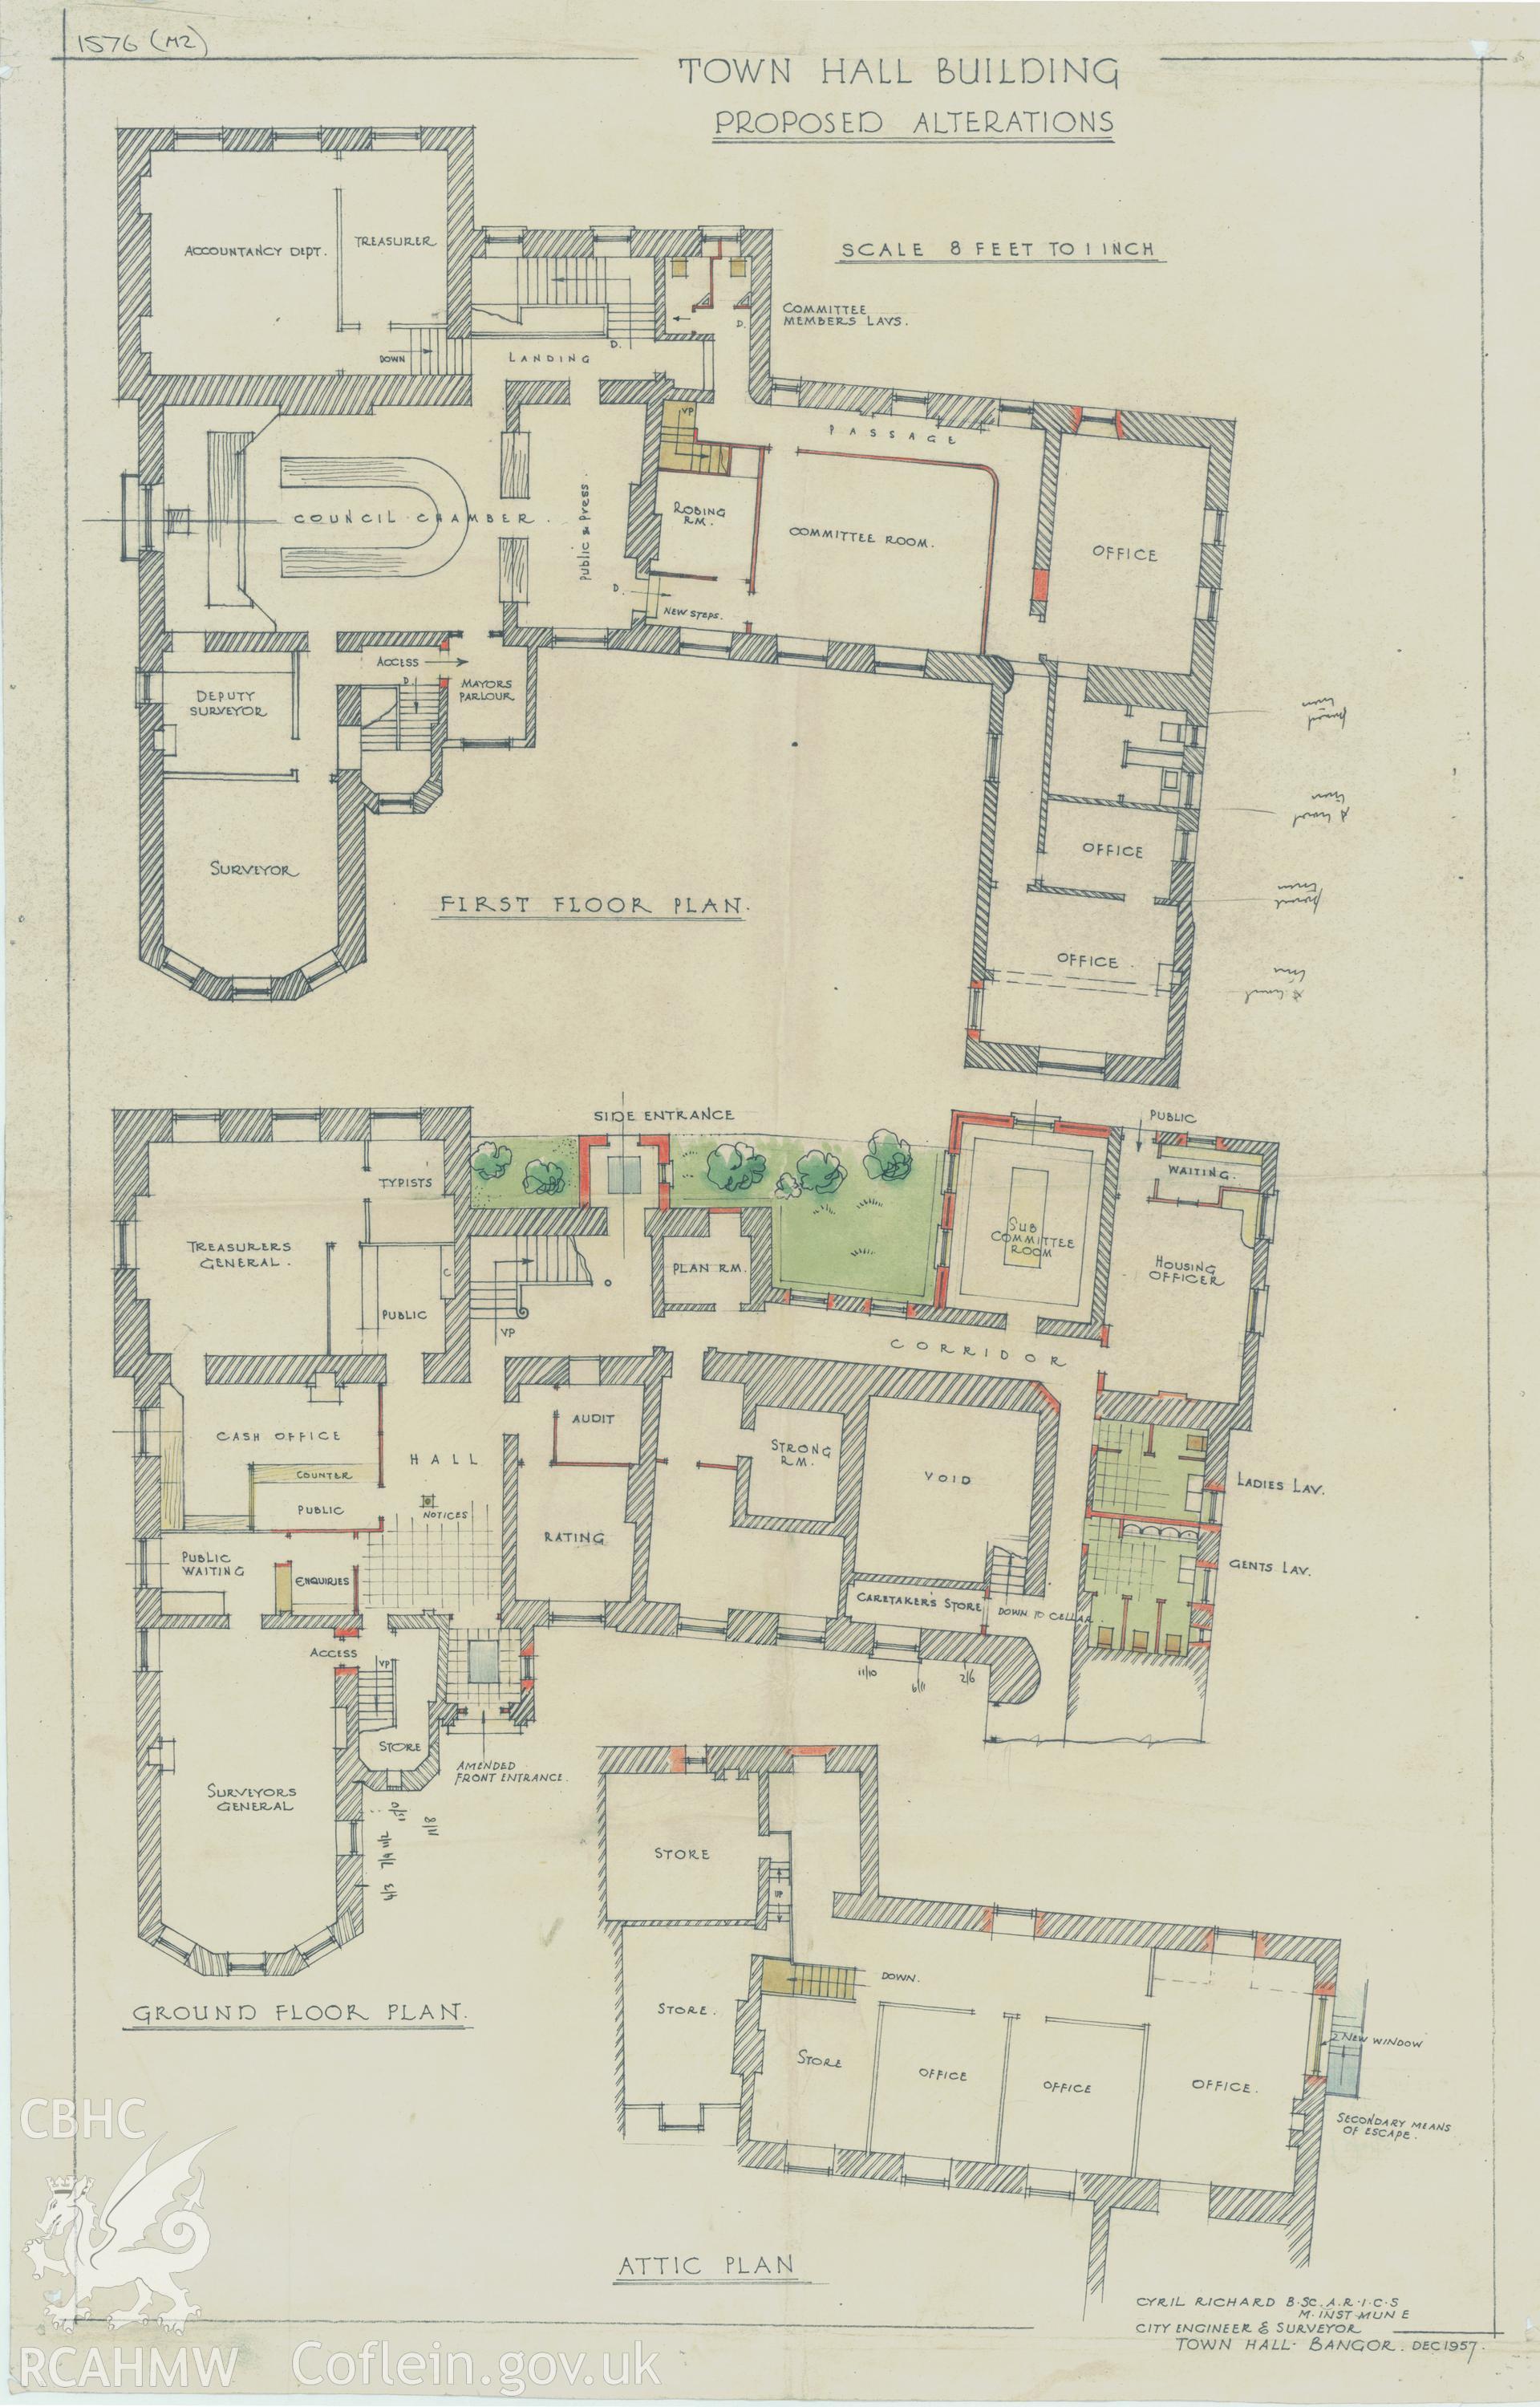 Copy of a non RCAHMW drawing by C. Richards showing plan of Bishops Palace, Bangor.